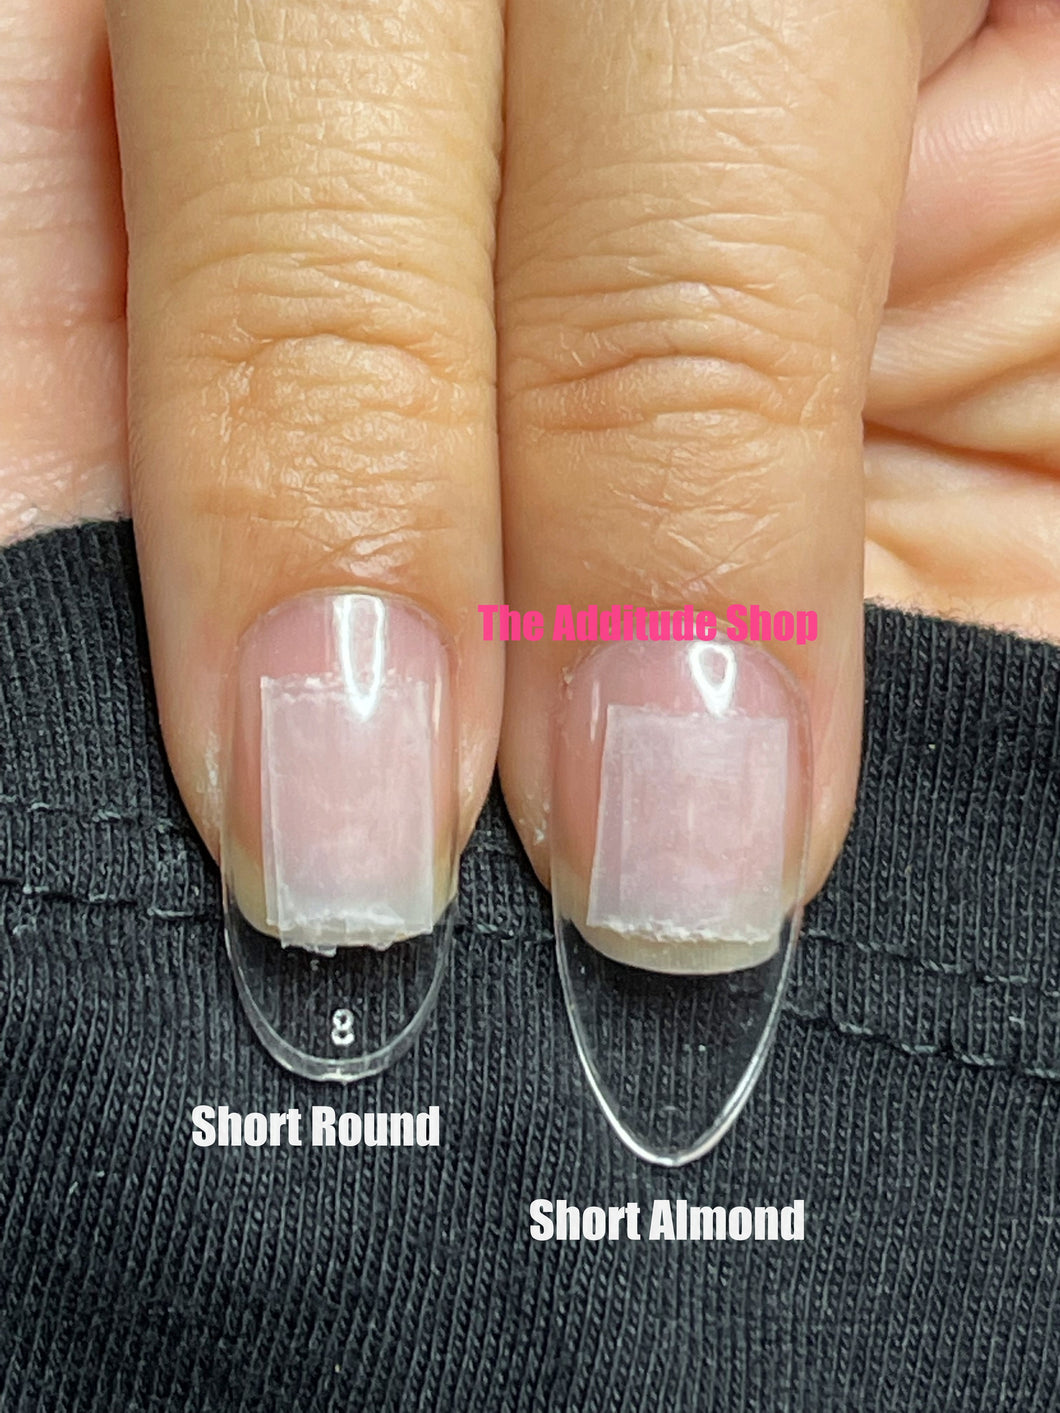 Short ROUND Soft Gel 500 Pieces Full Cover Nail Tips